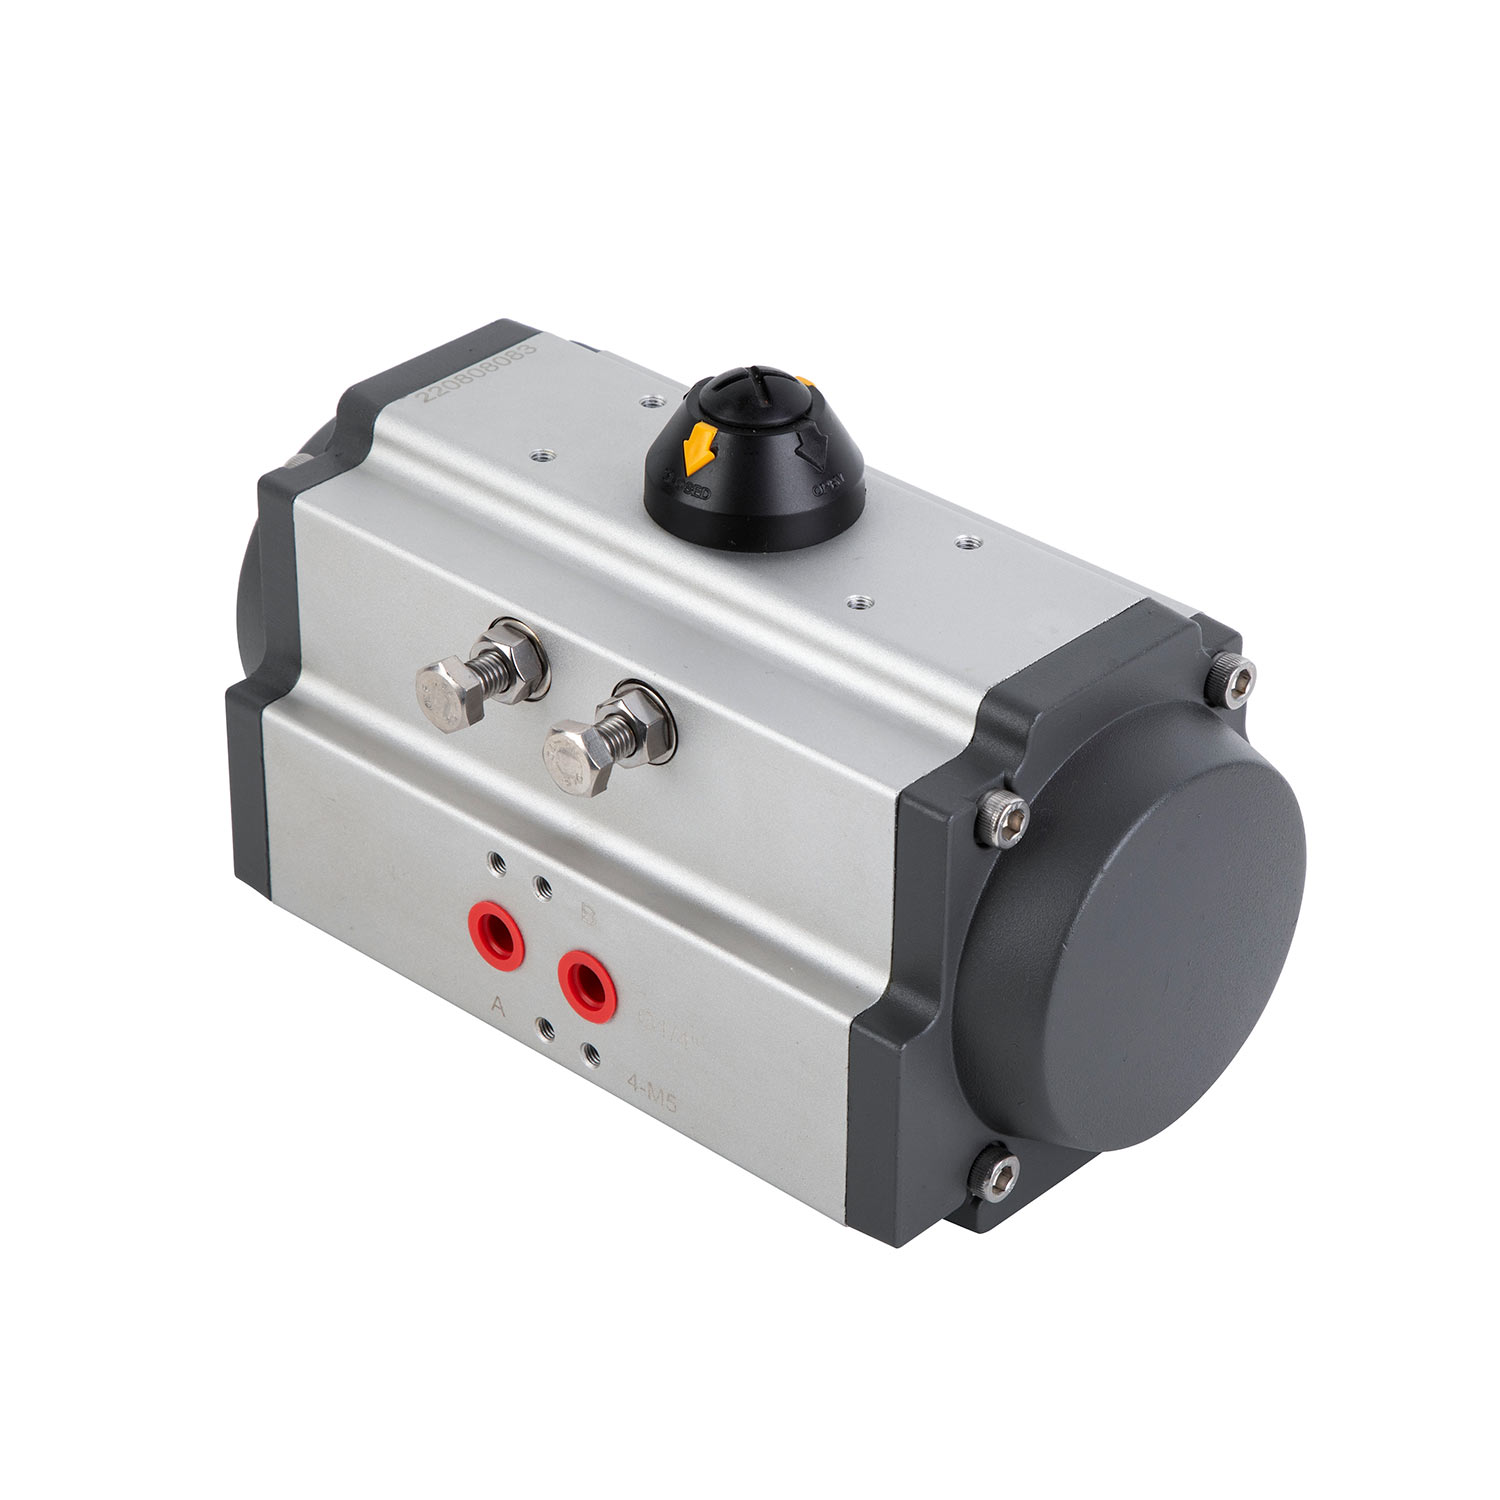 Rack And Pinion Rotary Actuator: Powering Efficiency And Precision In Industrial Automation